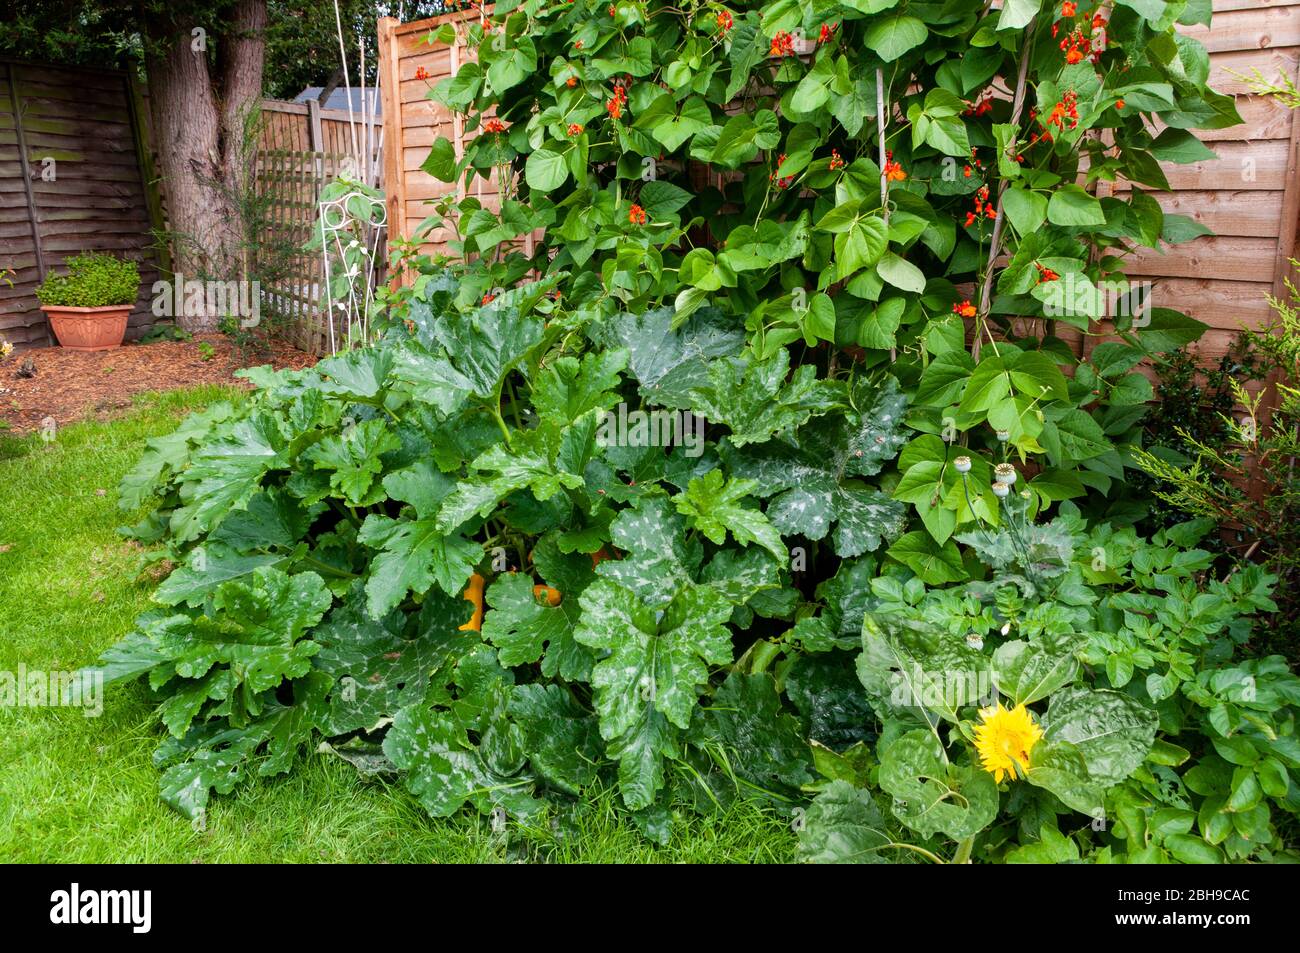 Courgette plants growing with runner beans in vegetable plot. Stock Photo